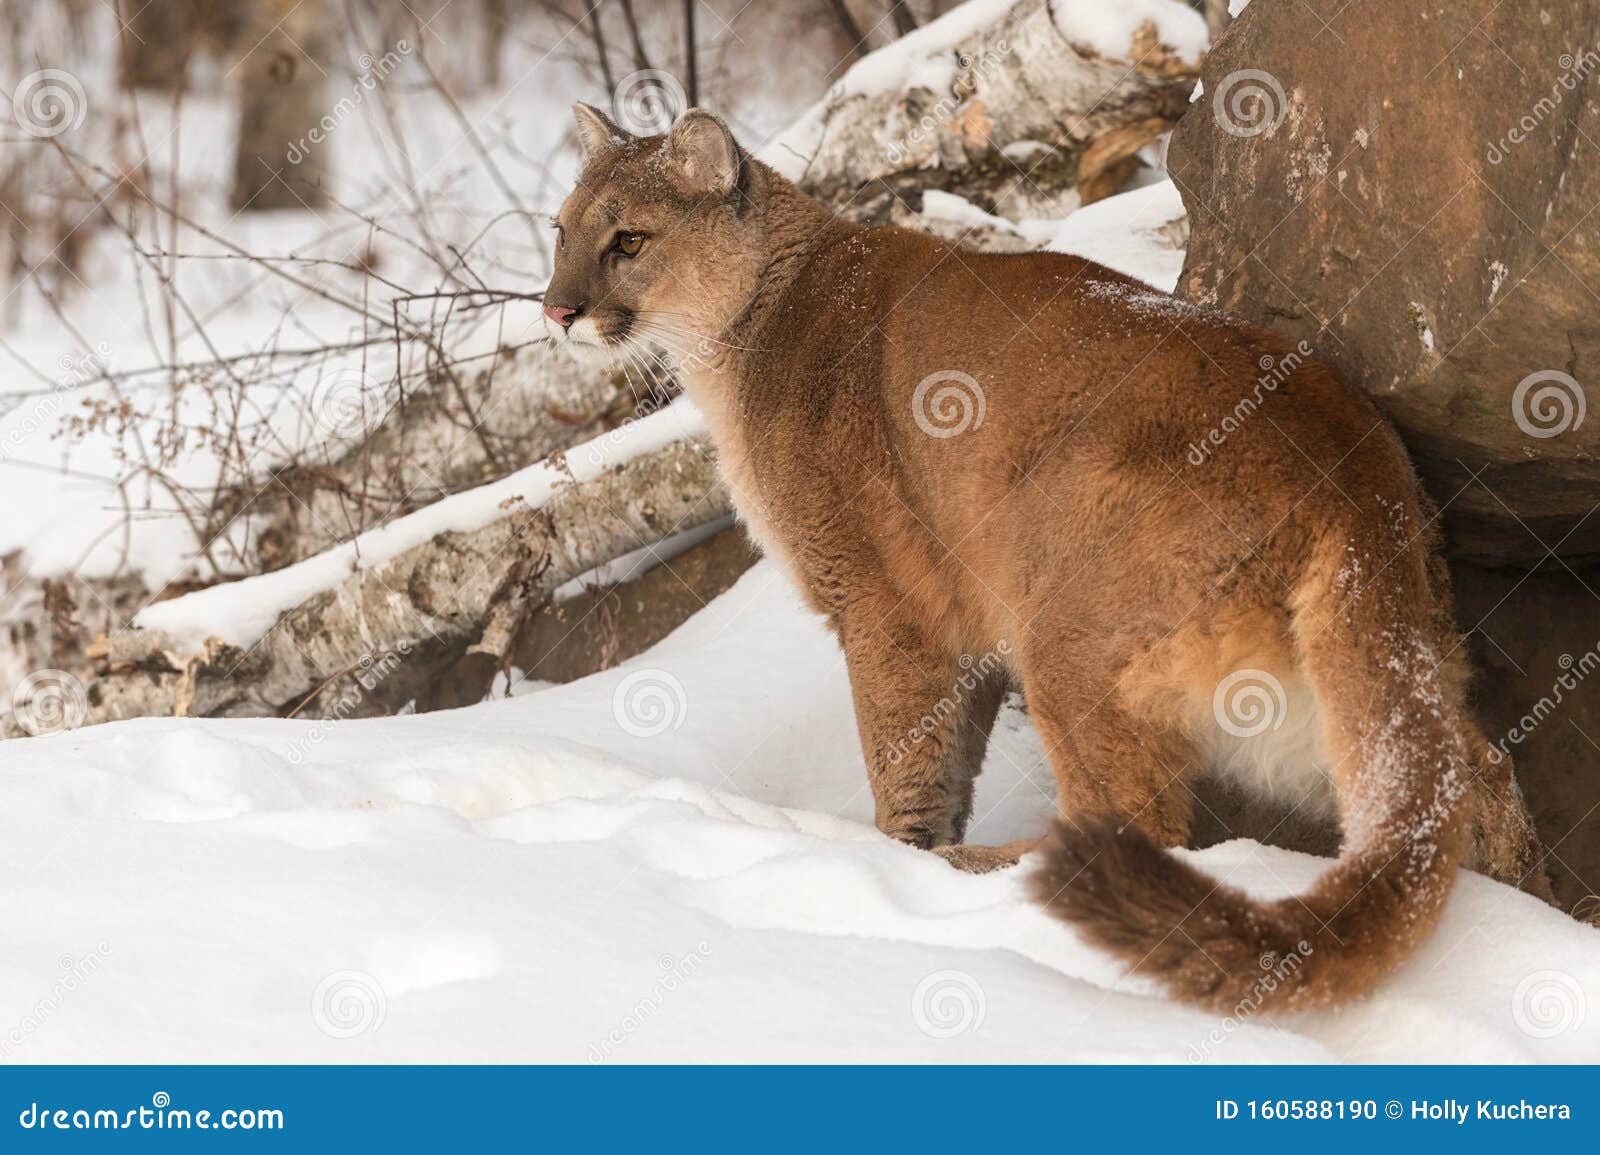 Adult Female Cougar Puma Concolor Stands Curling Tail Front of Den Winter Photo Image of catamount, lion: 160588190